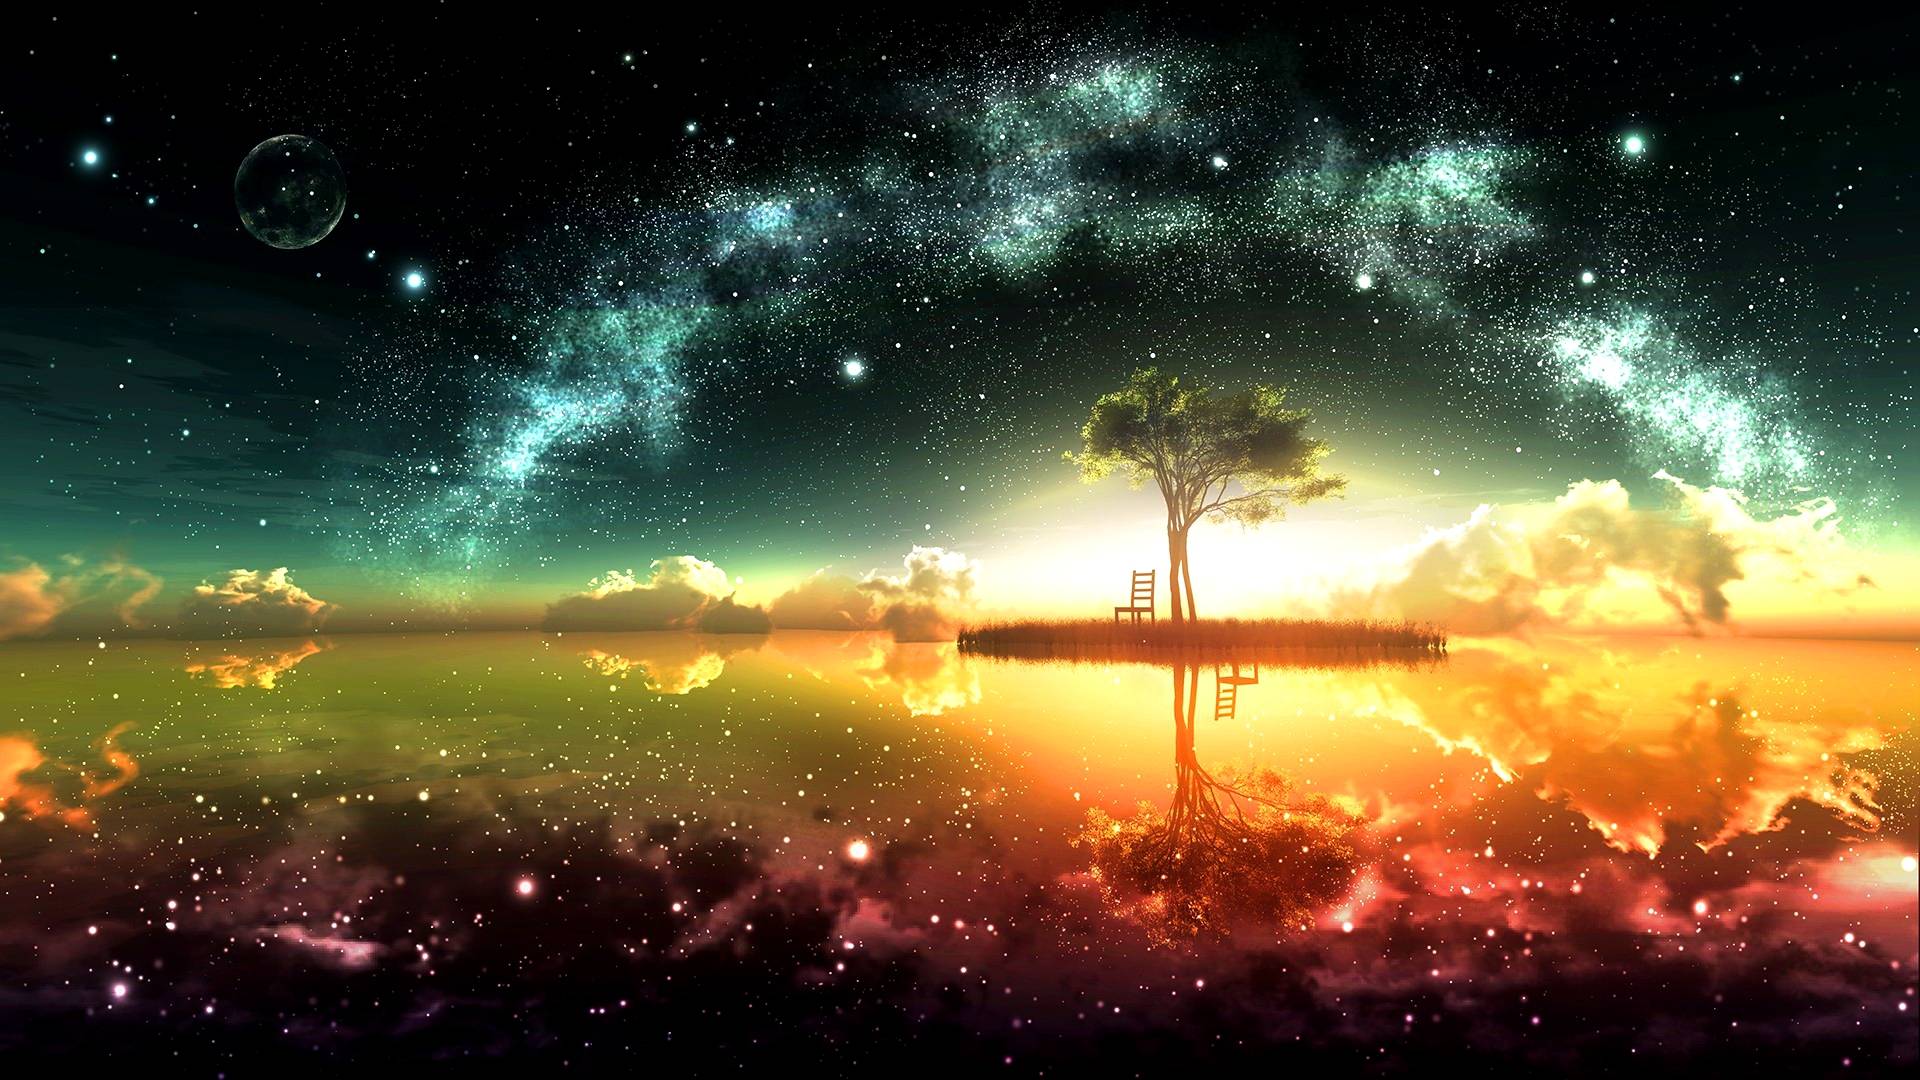 Space Hd Wallpapers For Pc & Mac, Tablet, Laptop, Mobile - Space Background - HD Wallpaper 